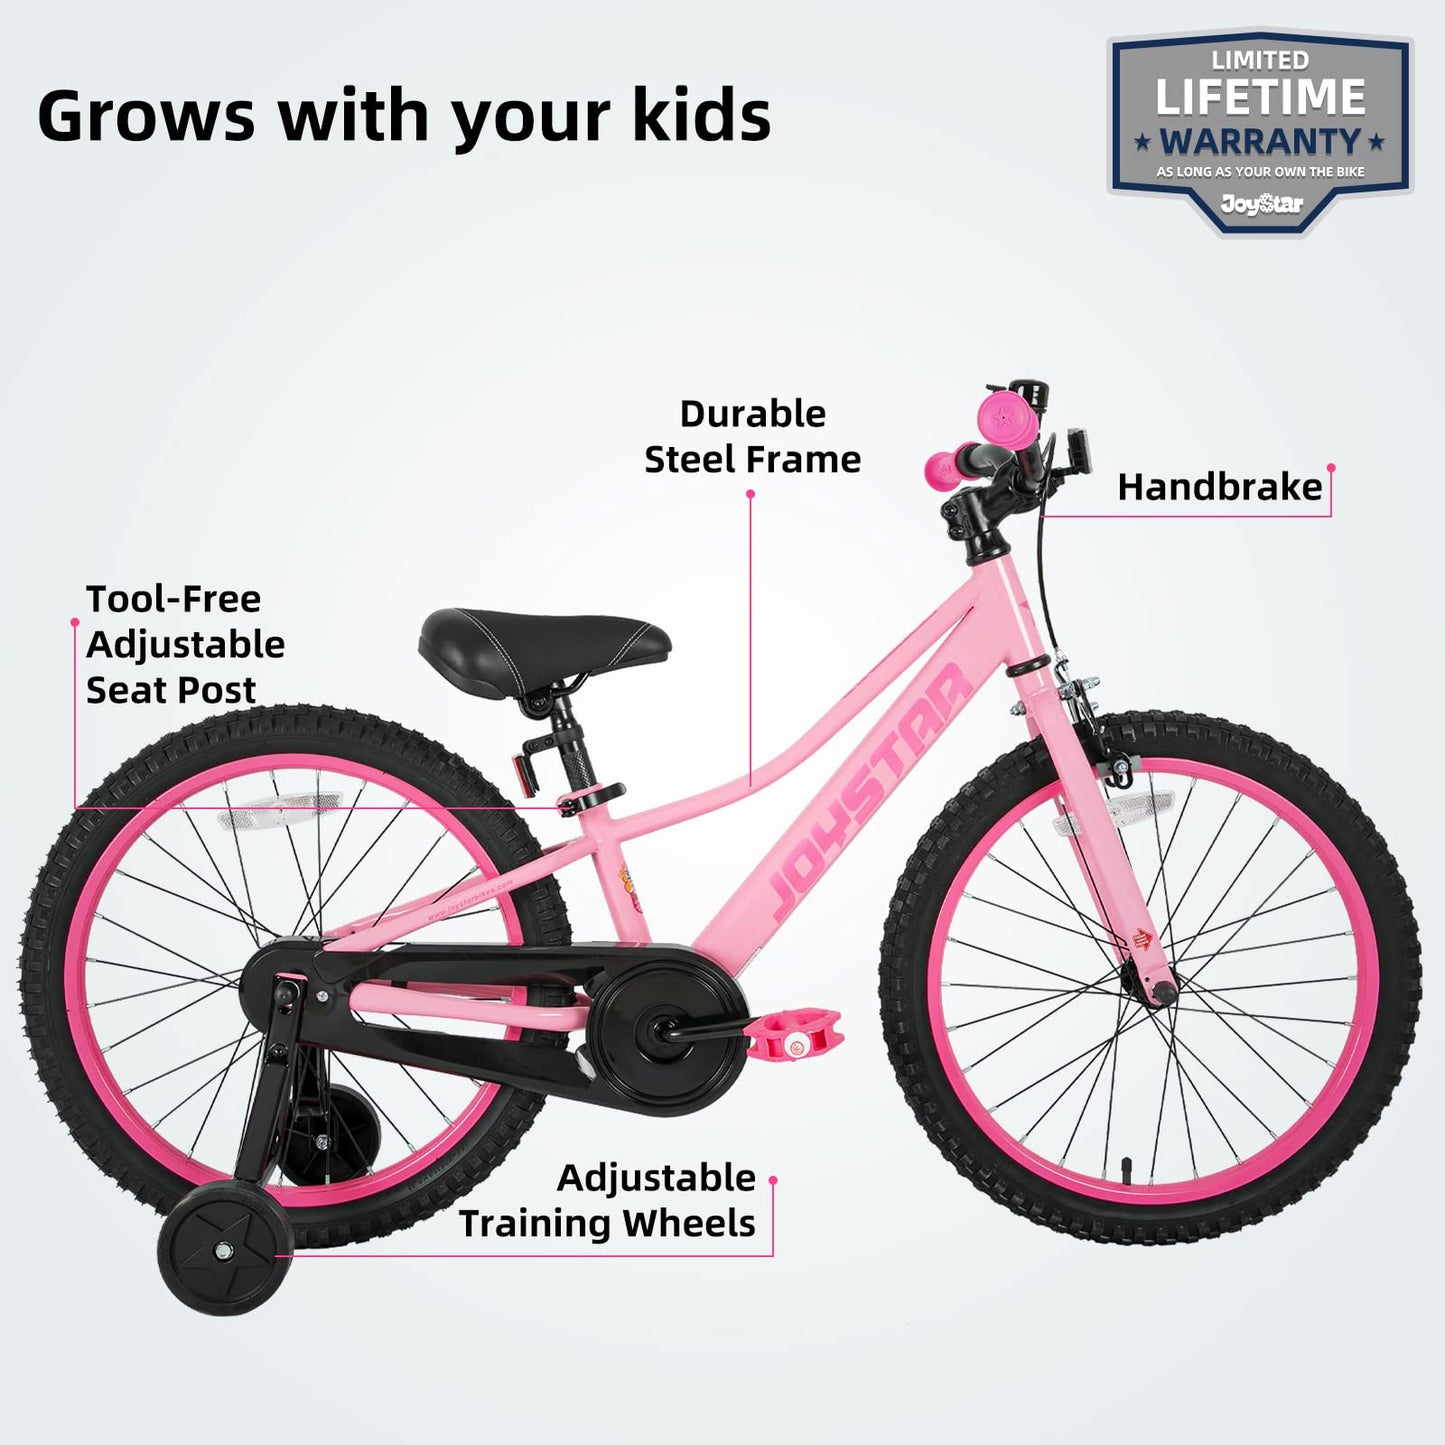 JOYSTAR 20 Inch Girls Bike with Training Wheels for 7-12 Years Old Children 20" Kids Bikes Kids Mountain Bicycle for Early Rider Kids' Bicycles Pink